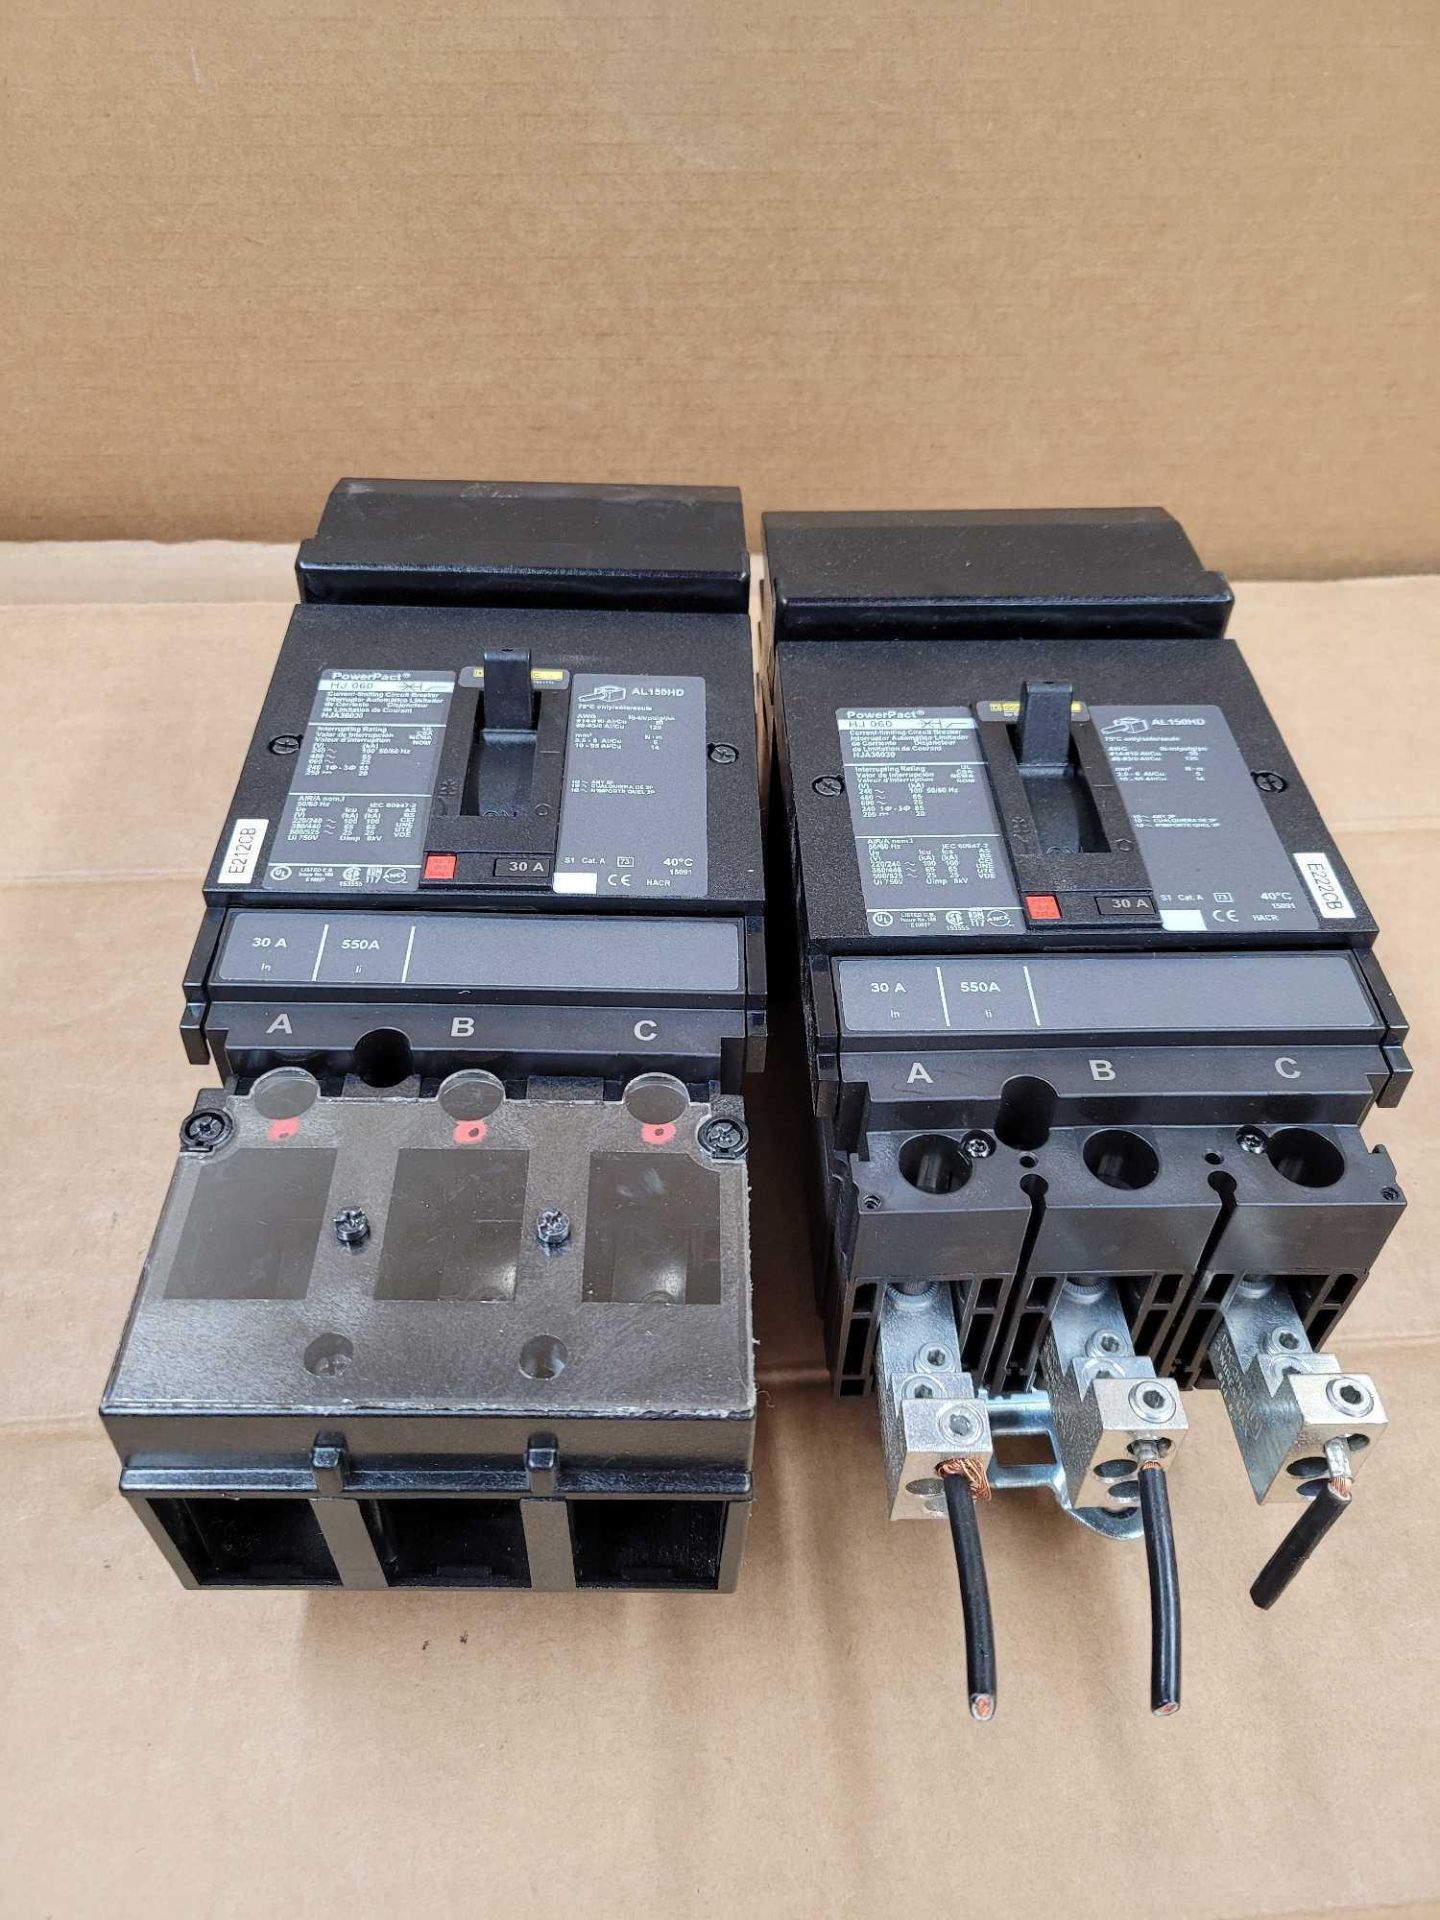 LOT OF 2 SQUARE D HJA36030 / 30 Amp Molded Case Circuit Breaker  /  Lot Weight: 9.6 lbs